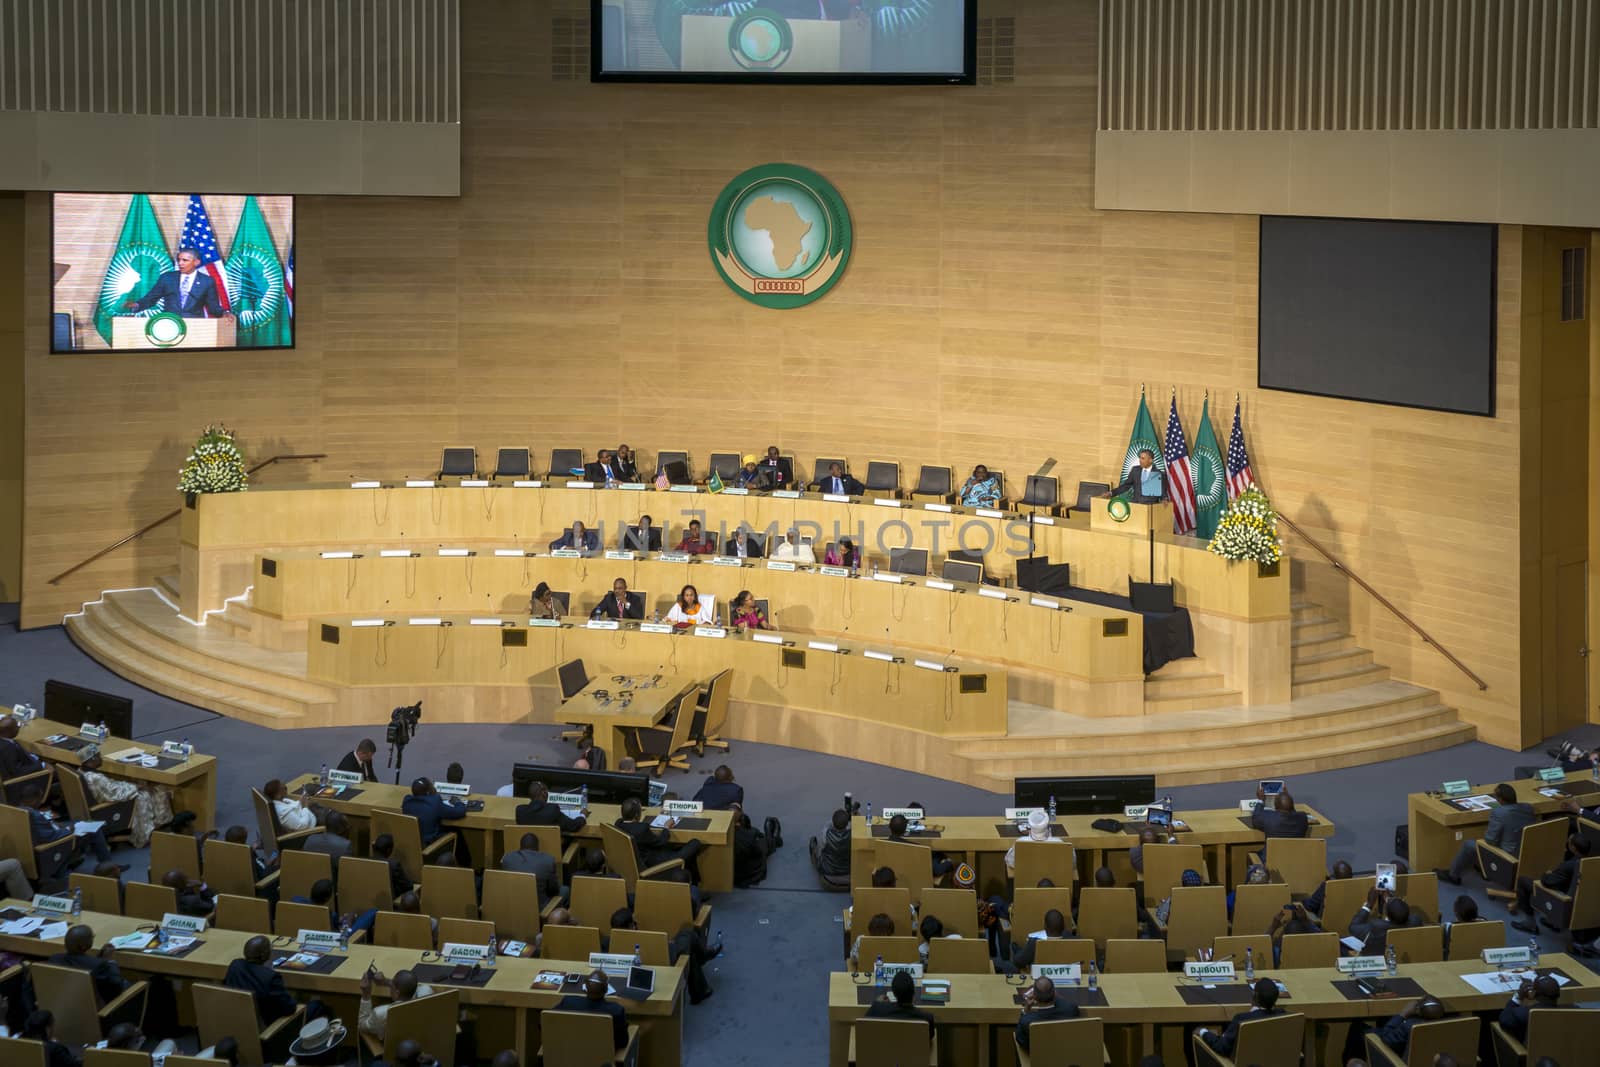 Addis Ababa - July 28: President Obama delivers a keynote speech to the African continent and its leaders, on July 28, 2015, at the Nelson Mandela Hall of the AU Conference Centre in Addis Ababa, Ethiopia.